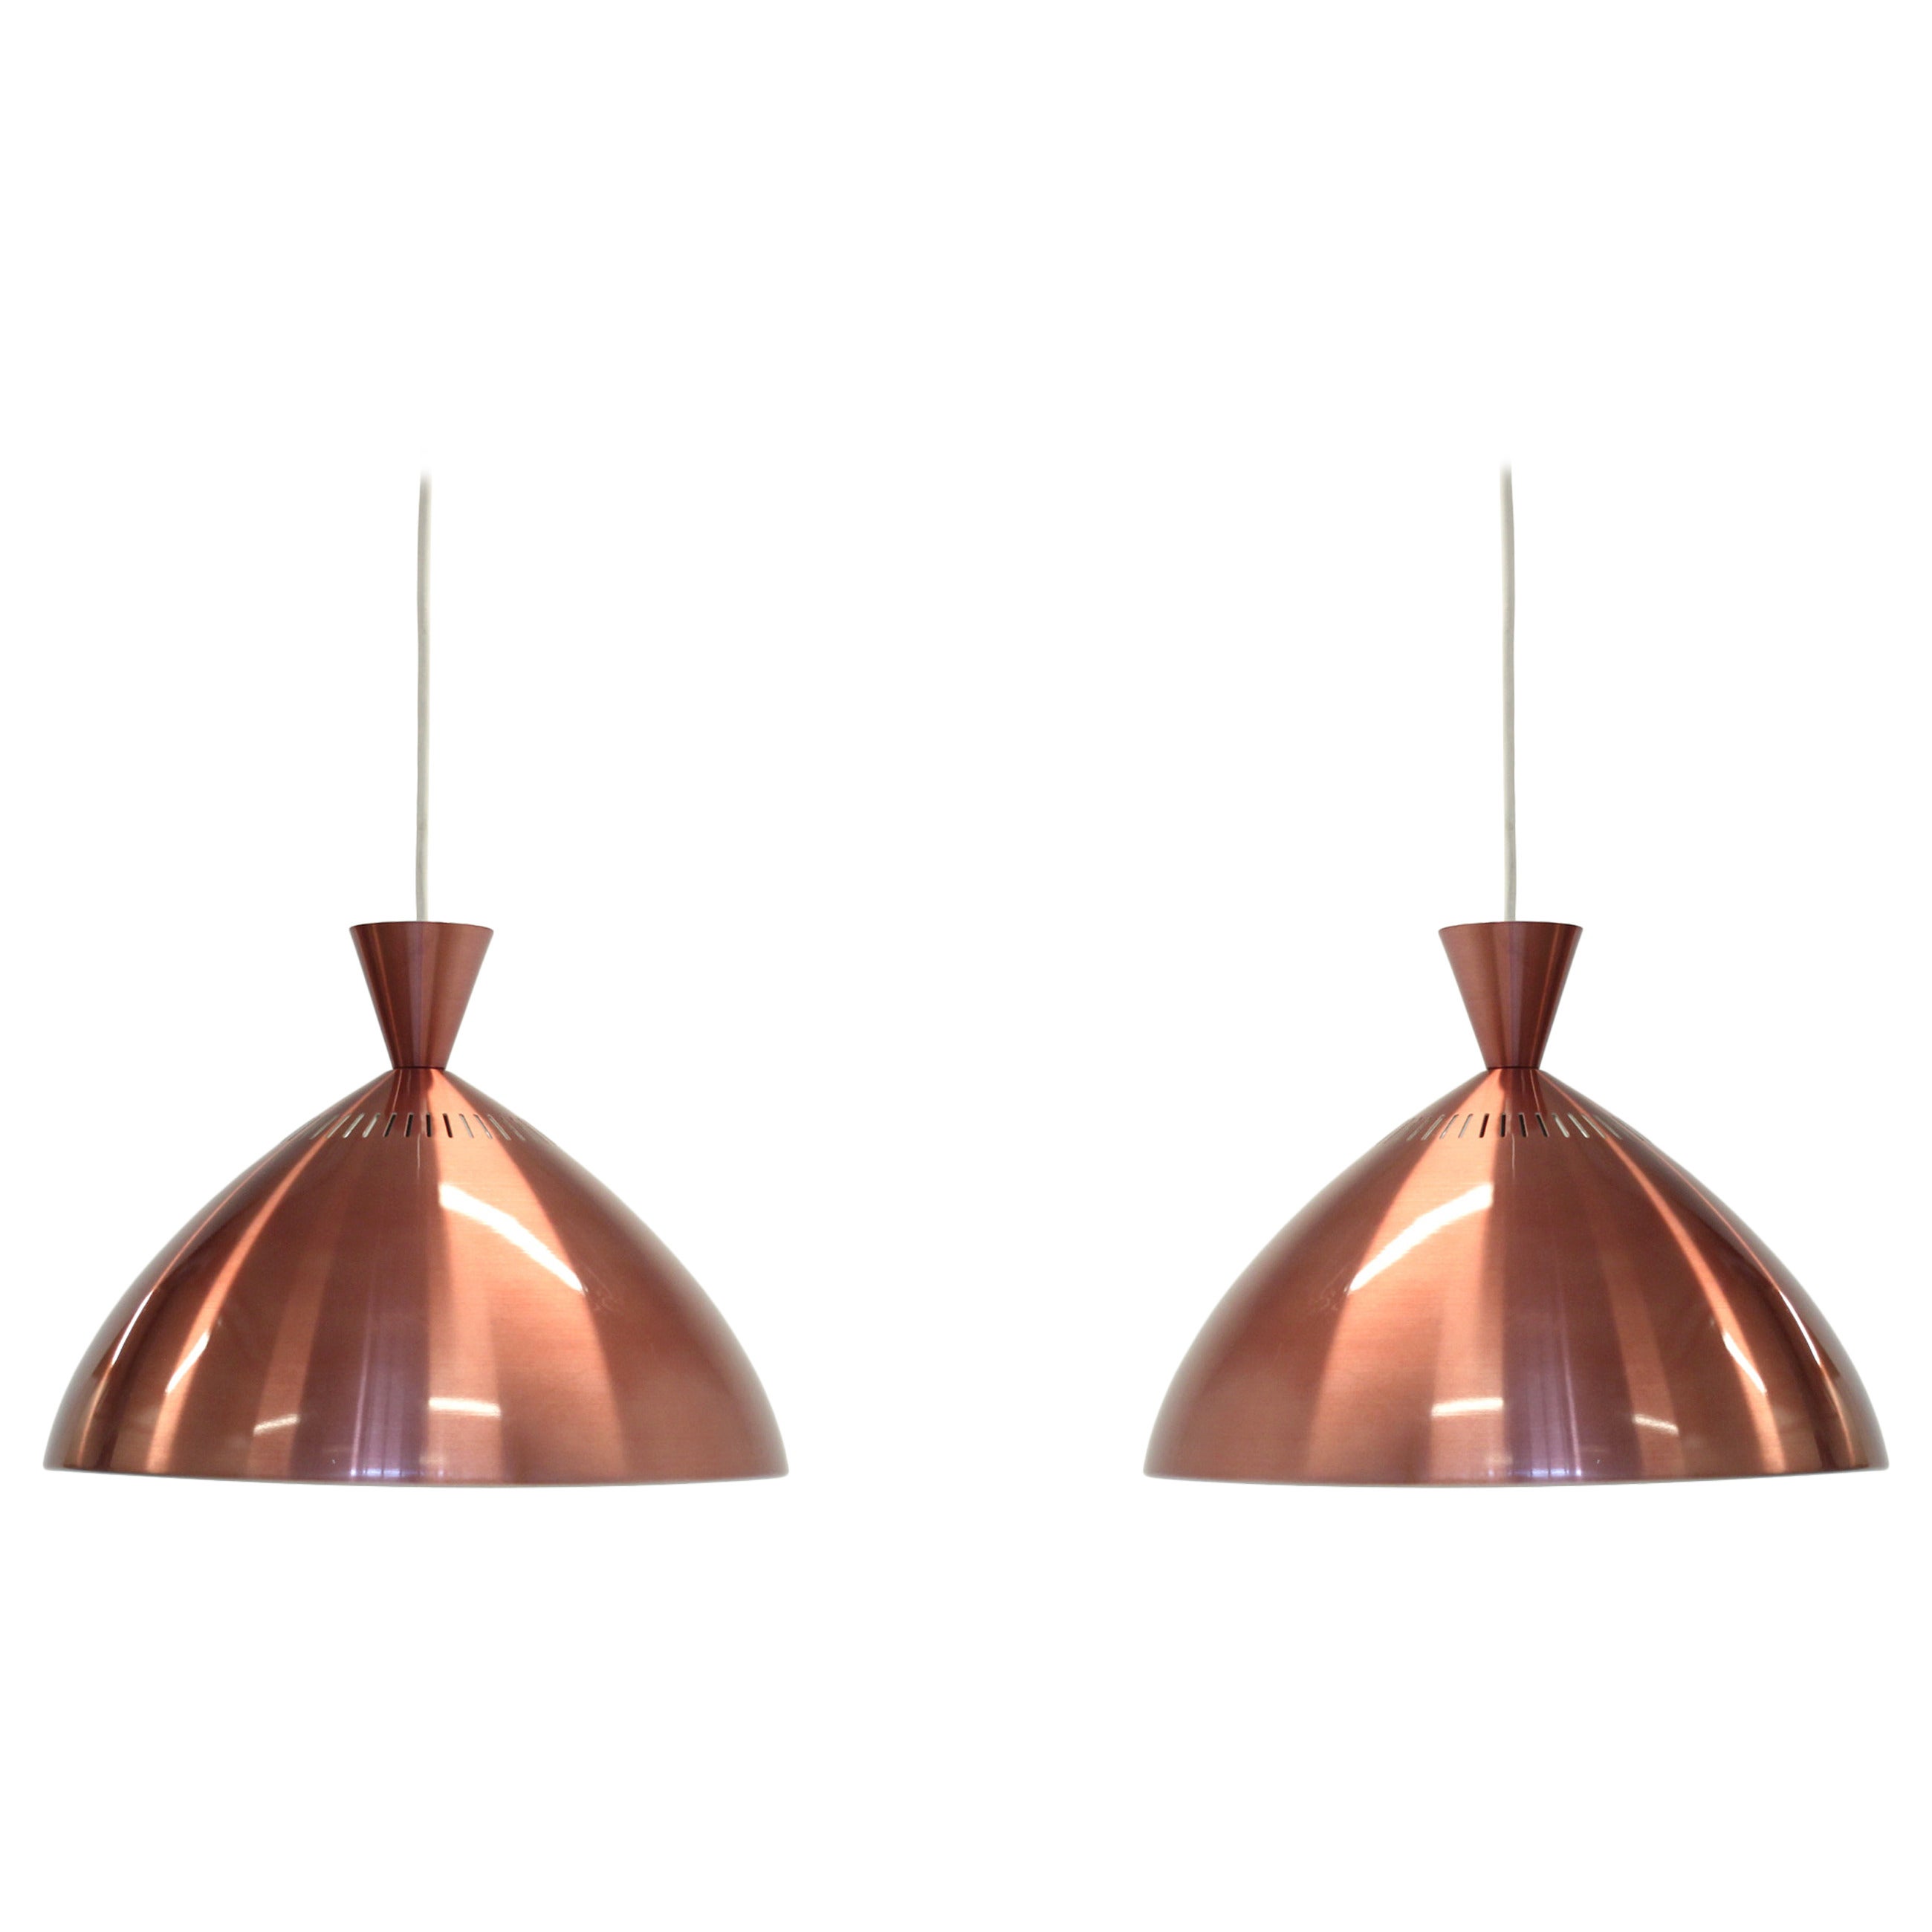 Pair of Scandinavian Mid Centiry Ceiling Lights, 1970s